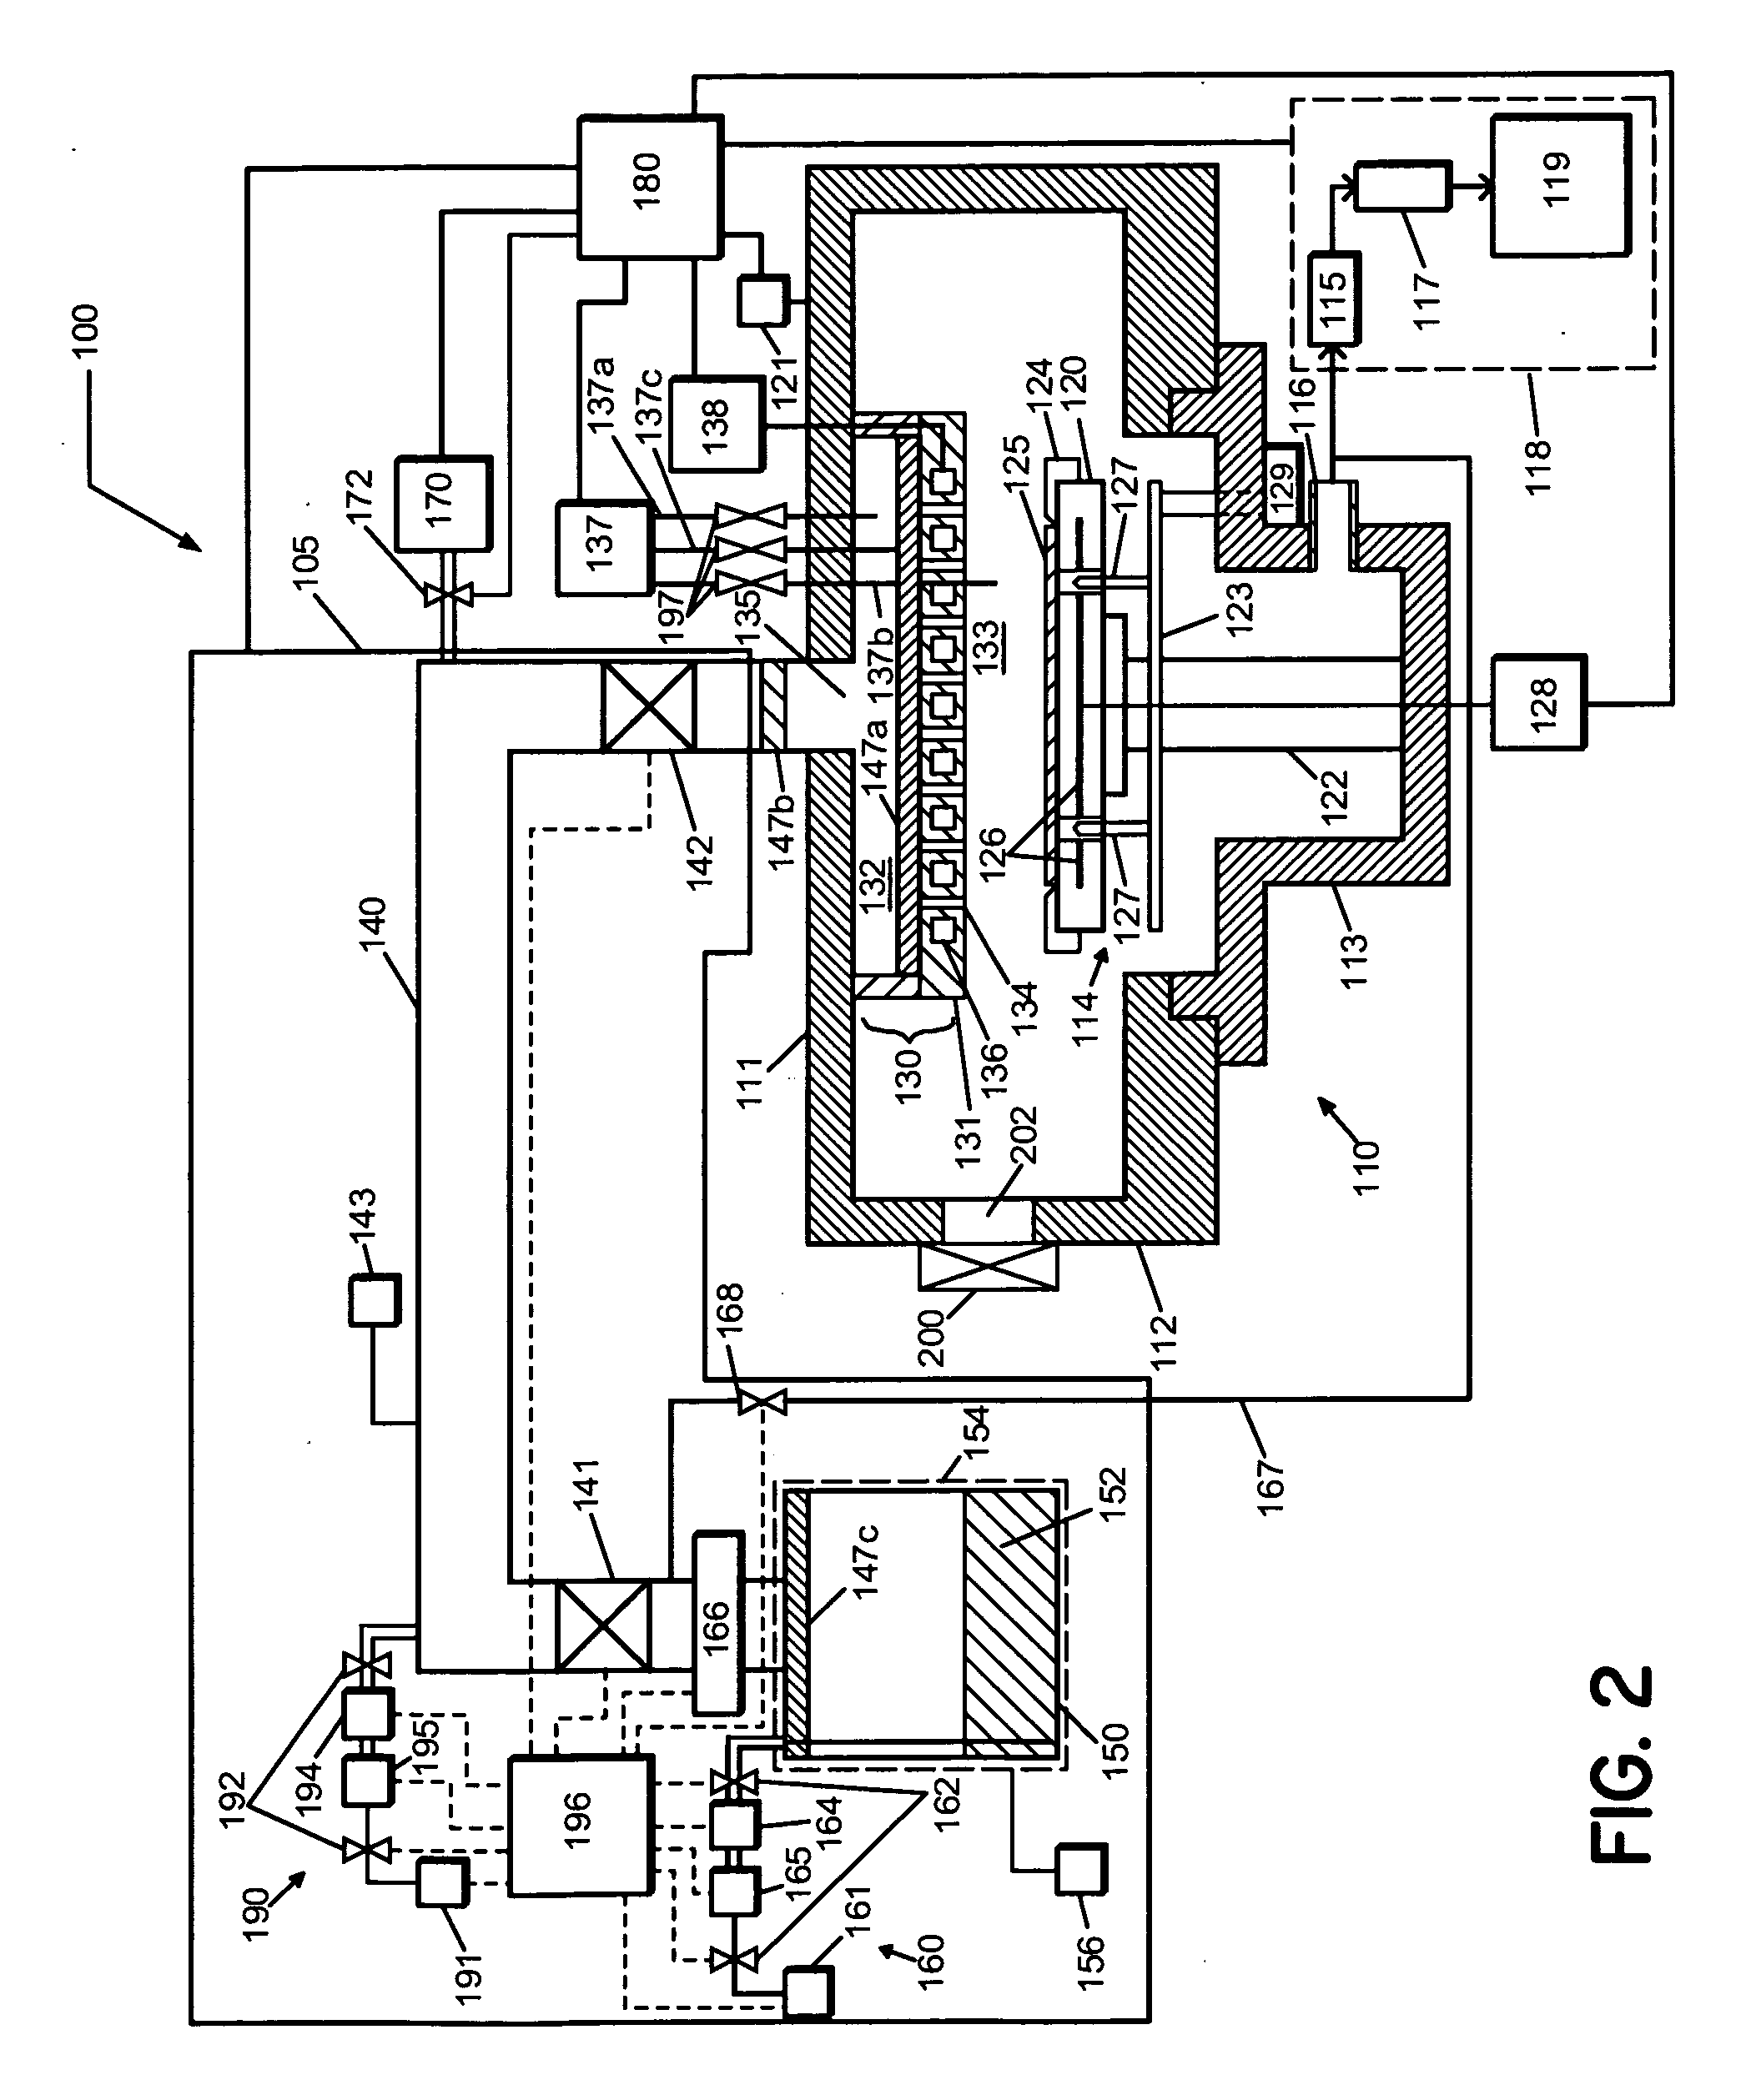 Method and apparatus for reducing particle formation in a vapor distribution system